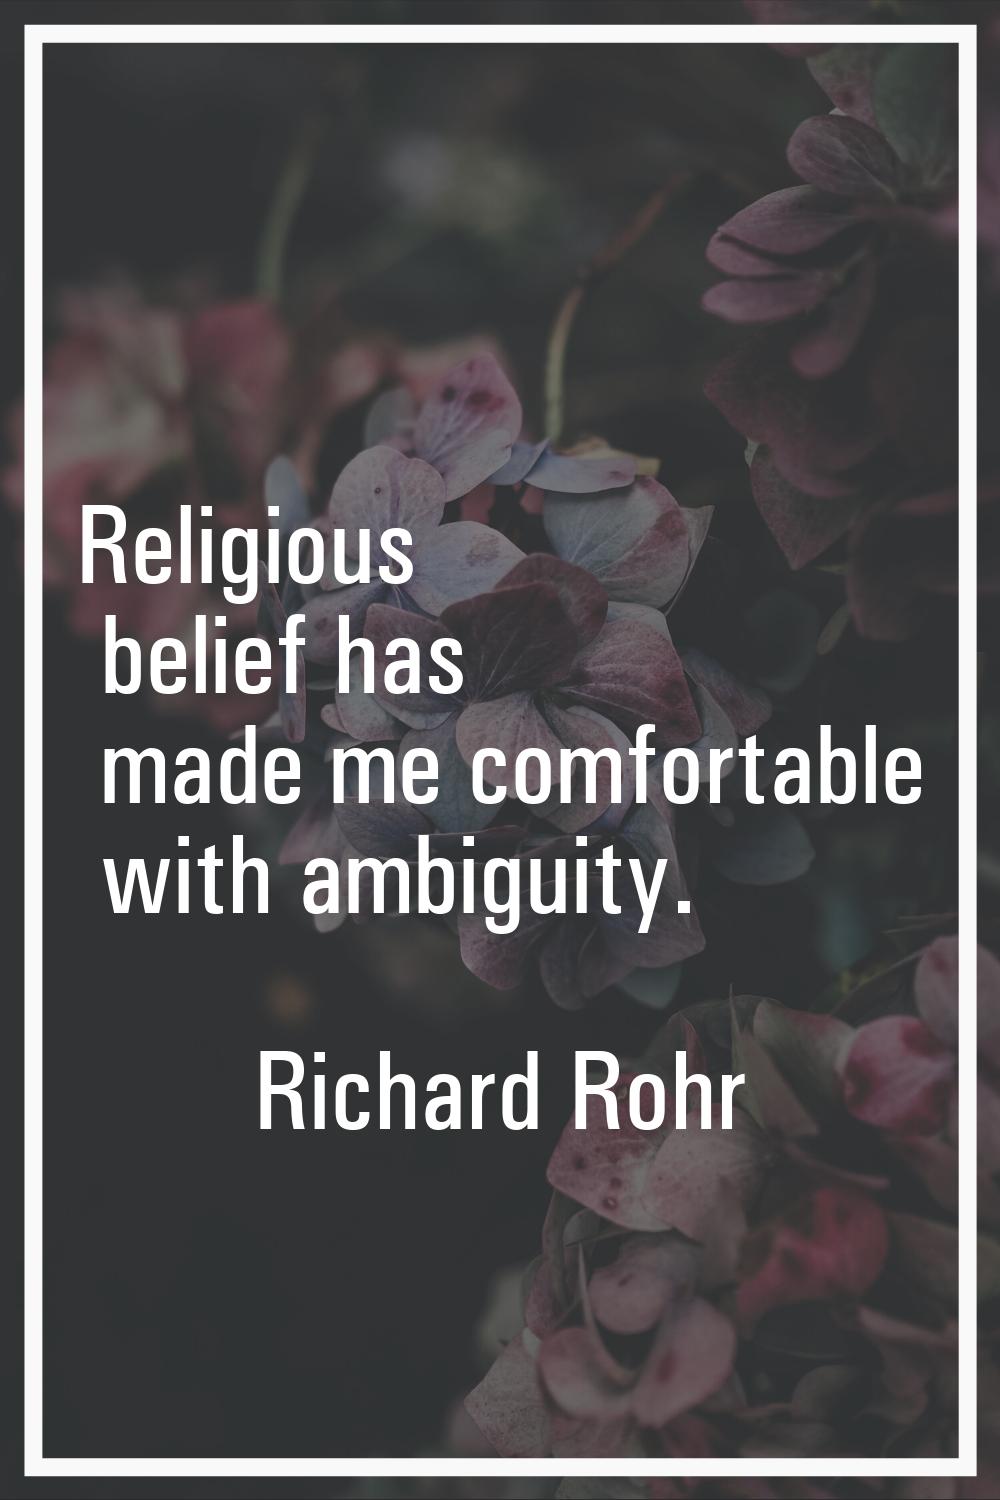 Religious belief has made me comfortable with ambiguity.